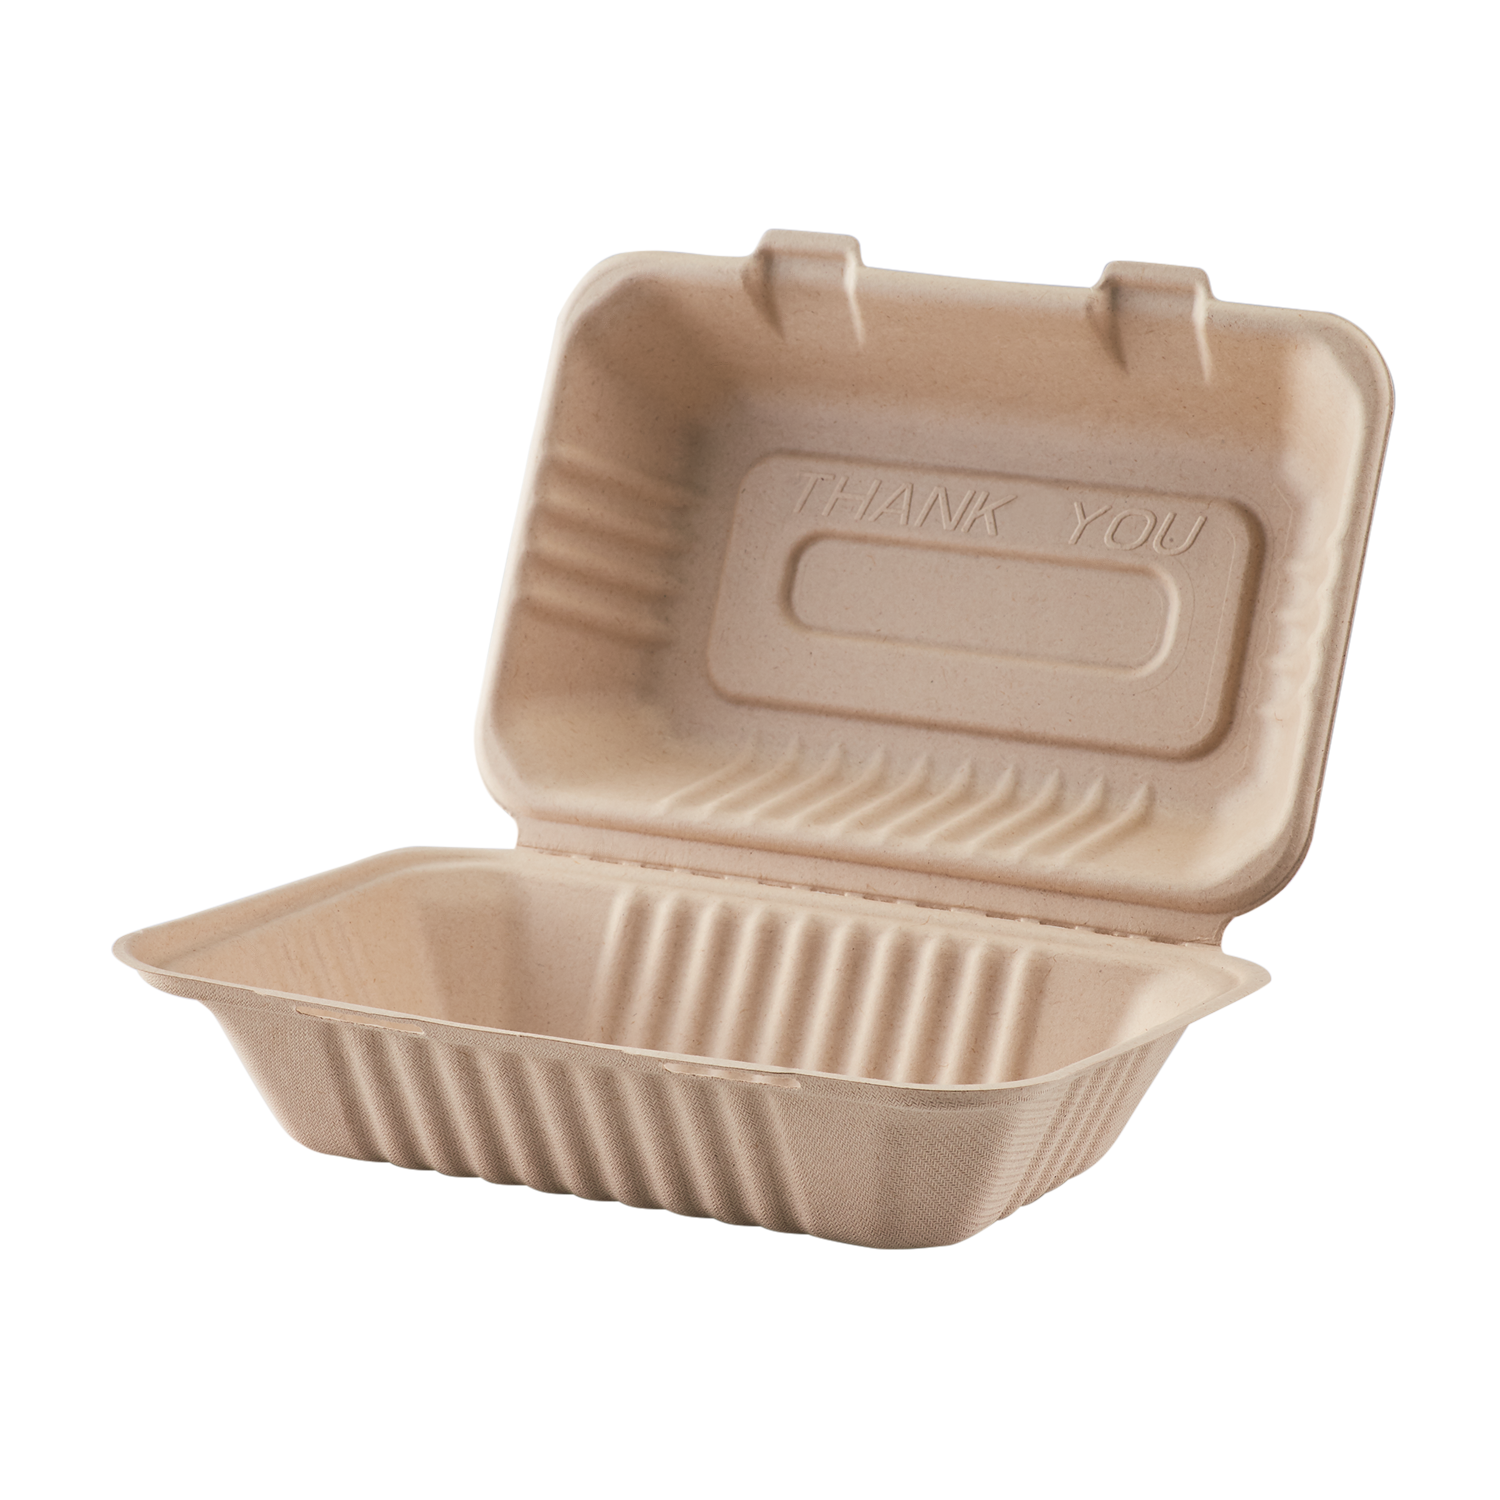 What Makes Mineral Filled Takeout Containers Different? – CiboWares